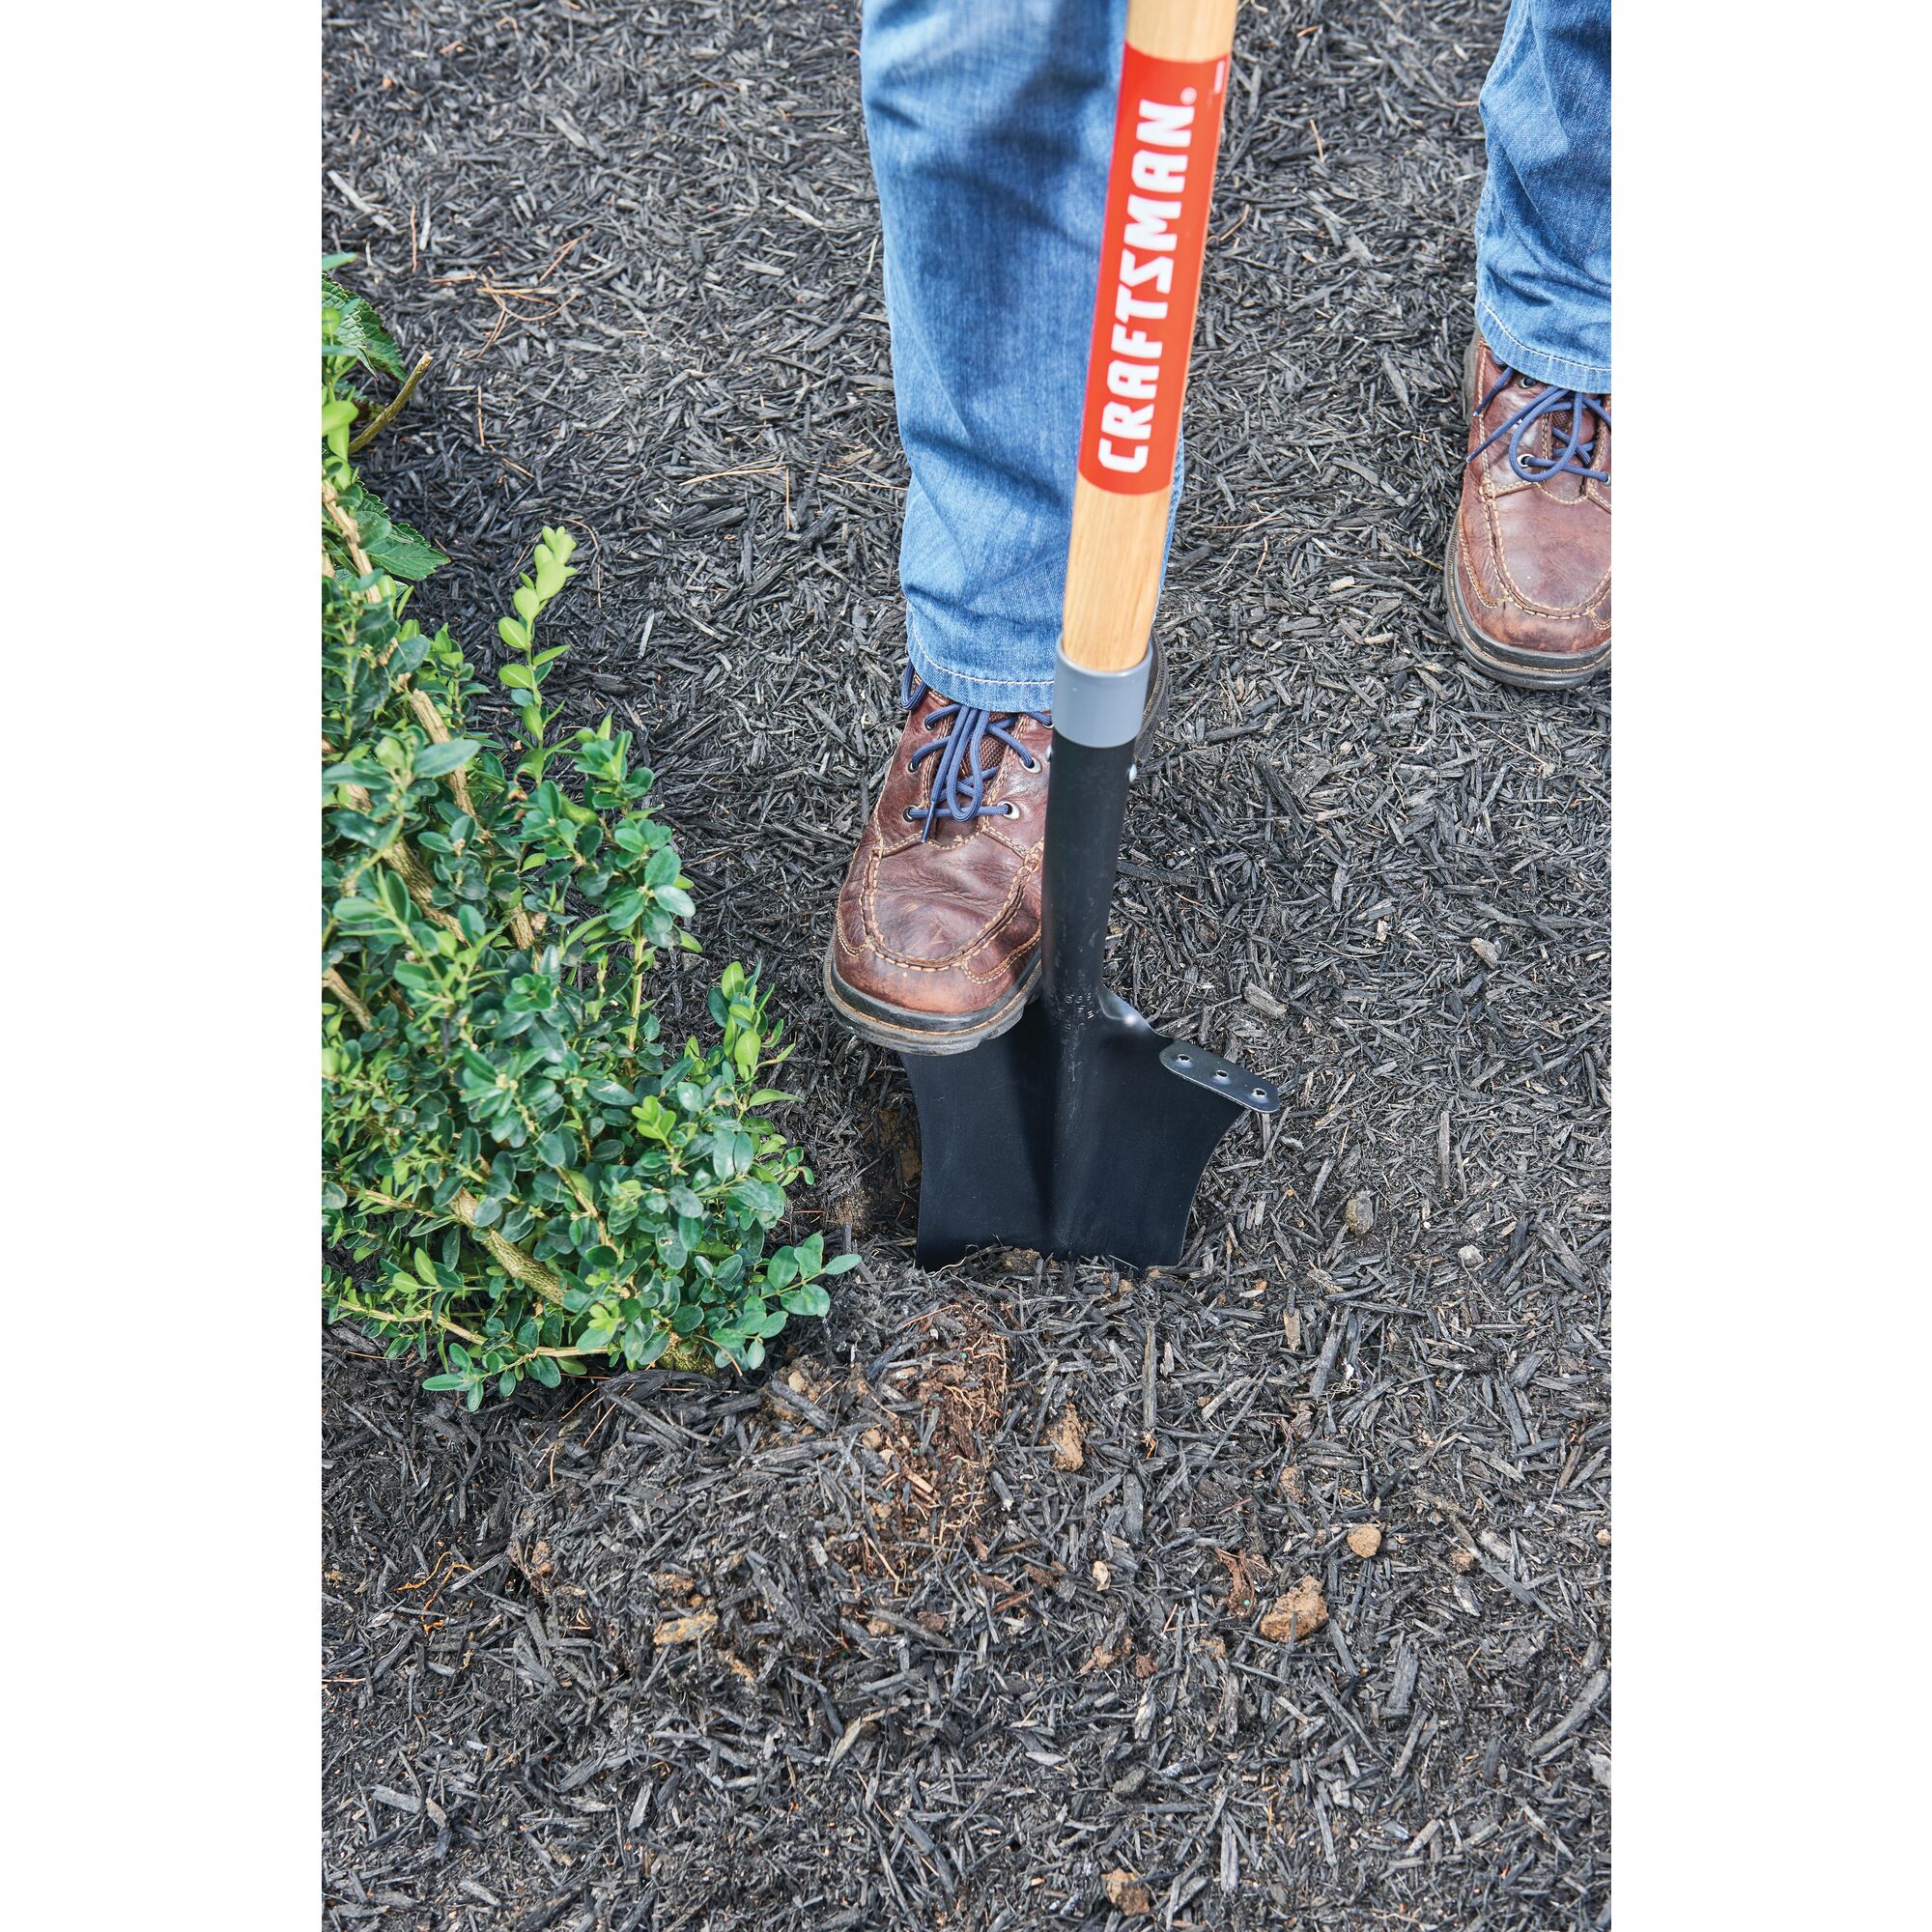 16 inch wood handle drain spade being used to dig up dirt.